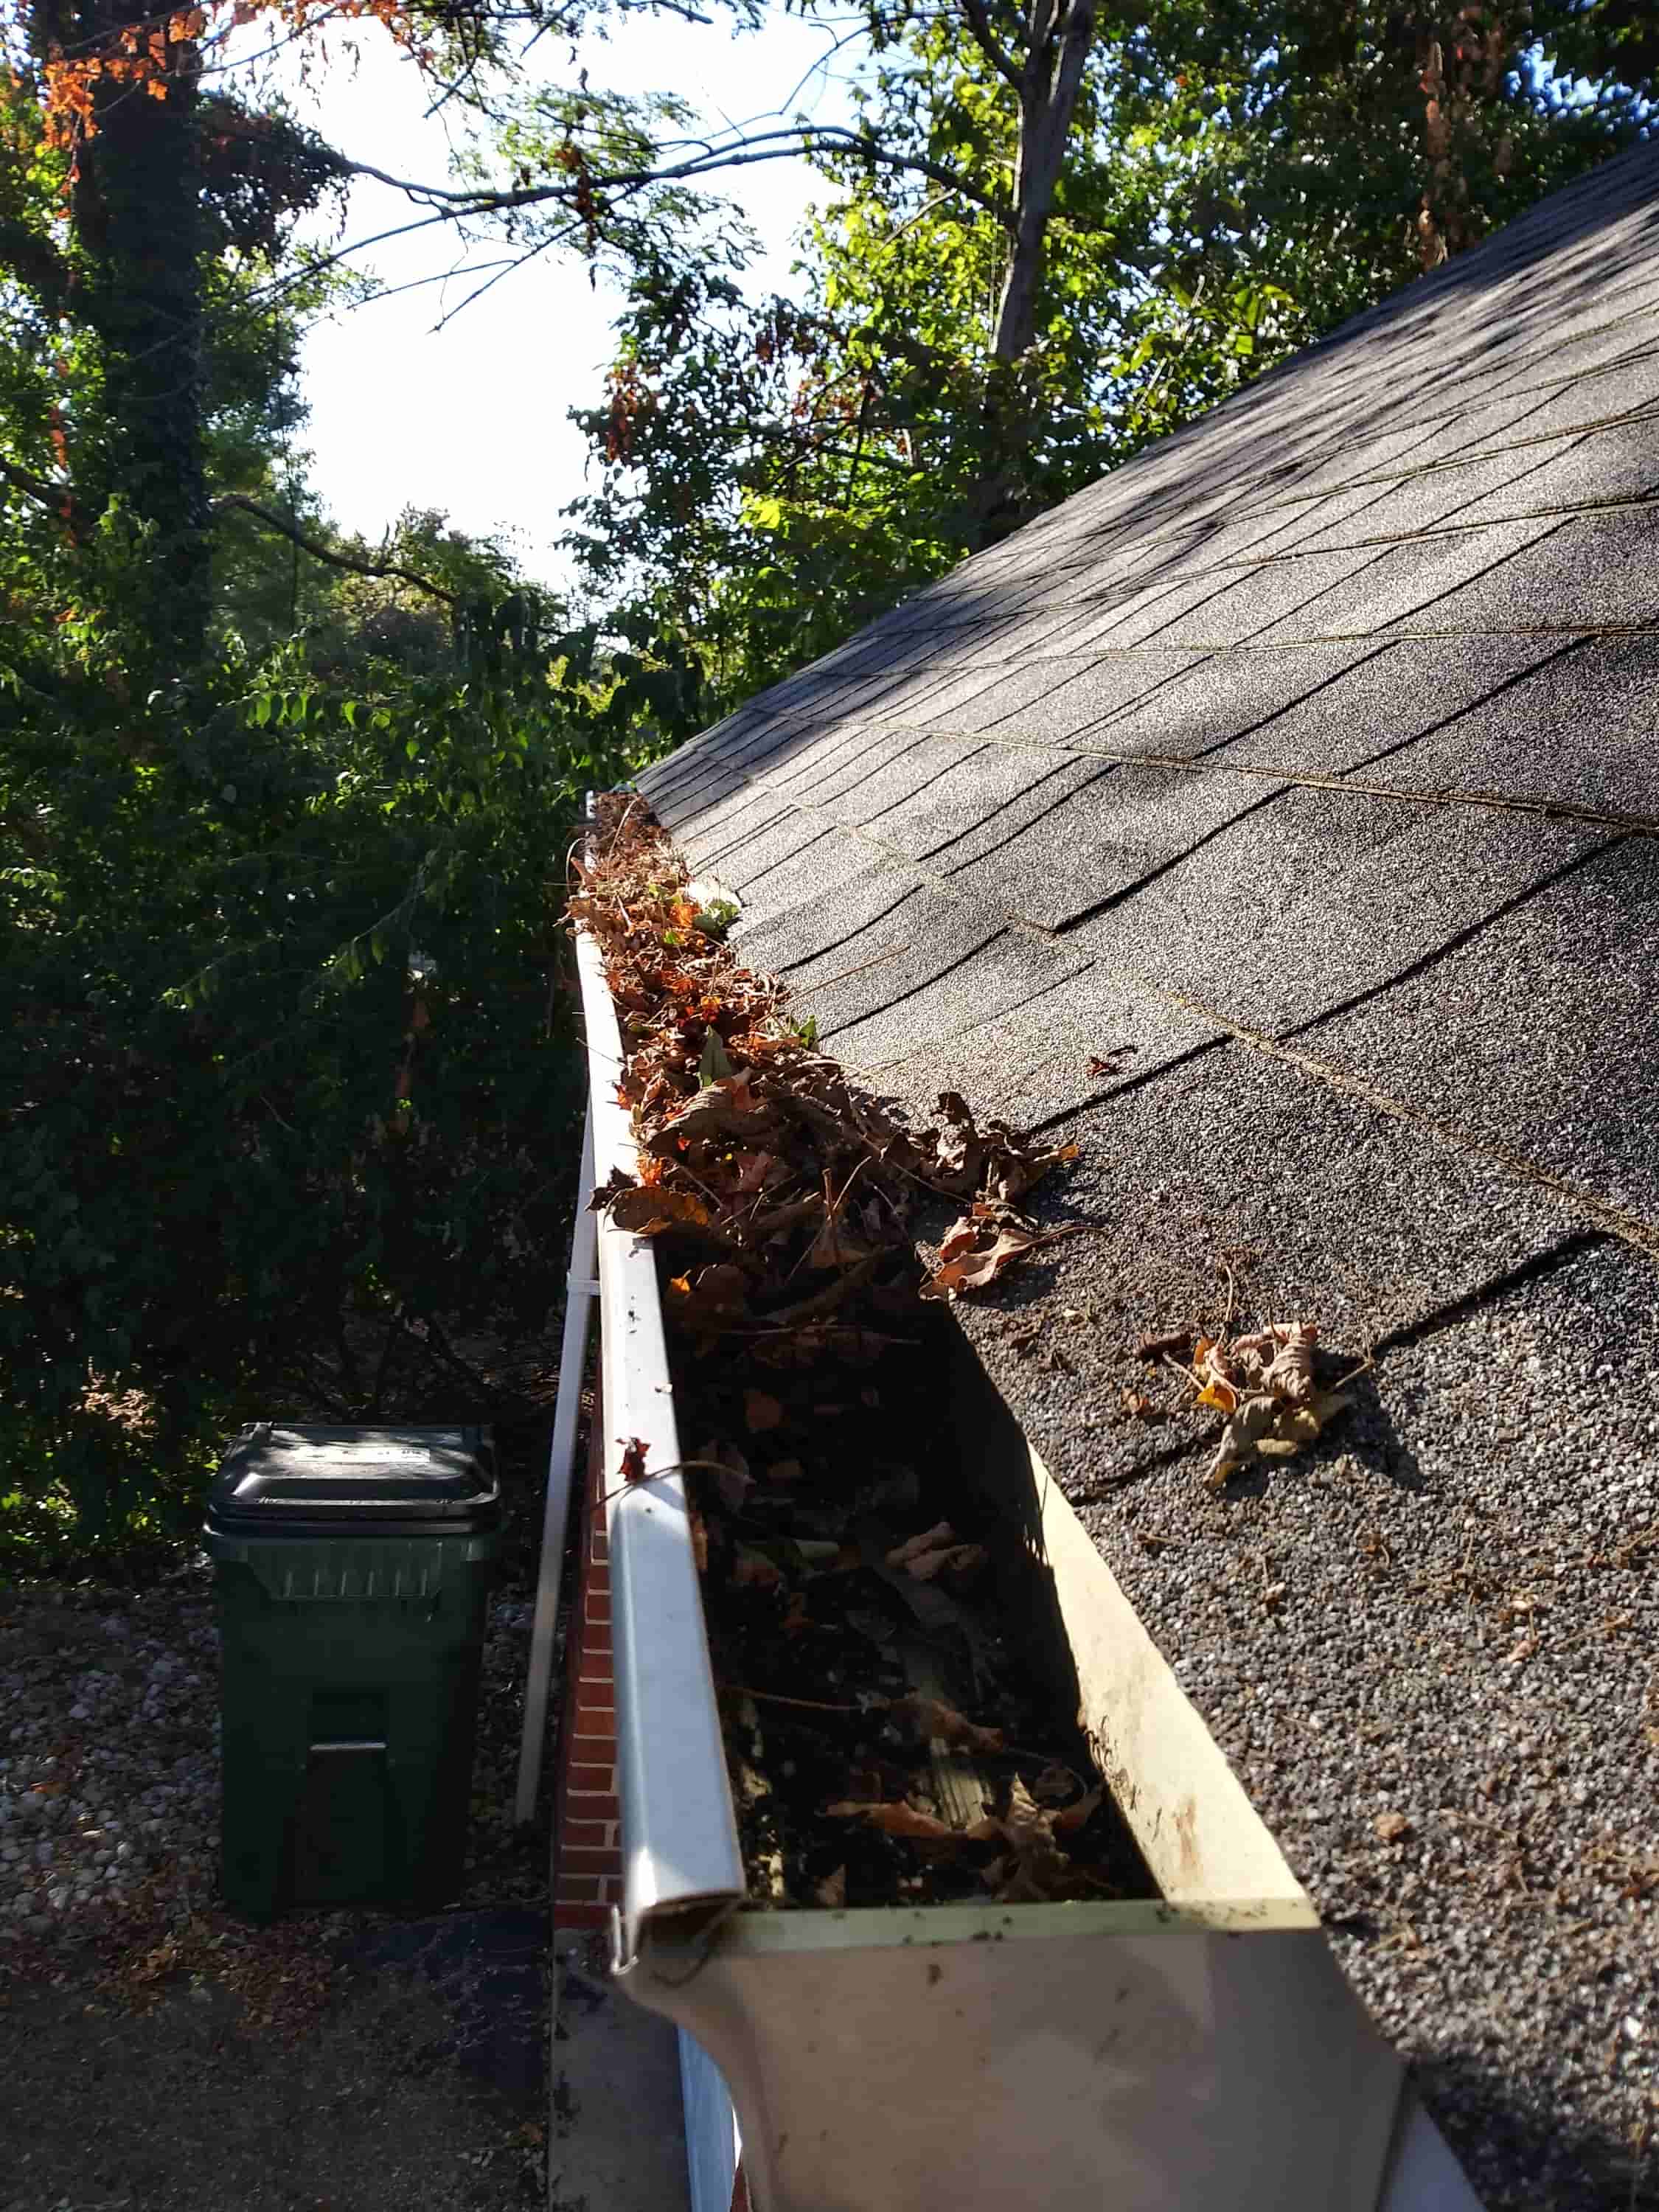 how to clean gutters 2 story house